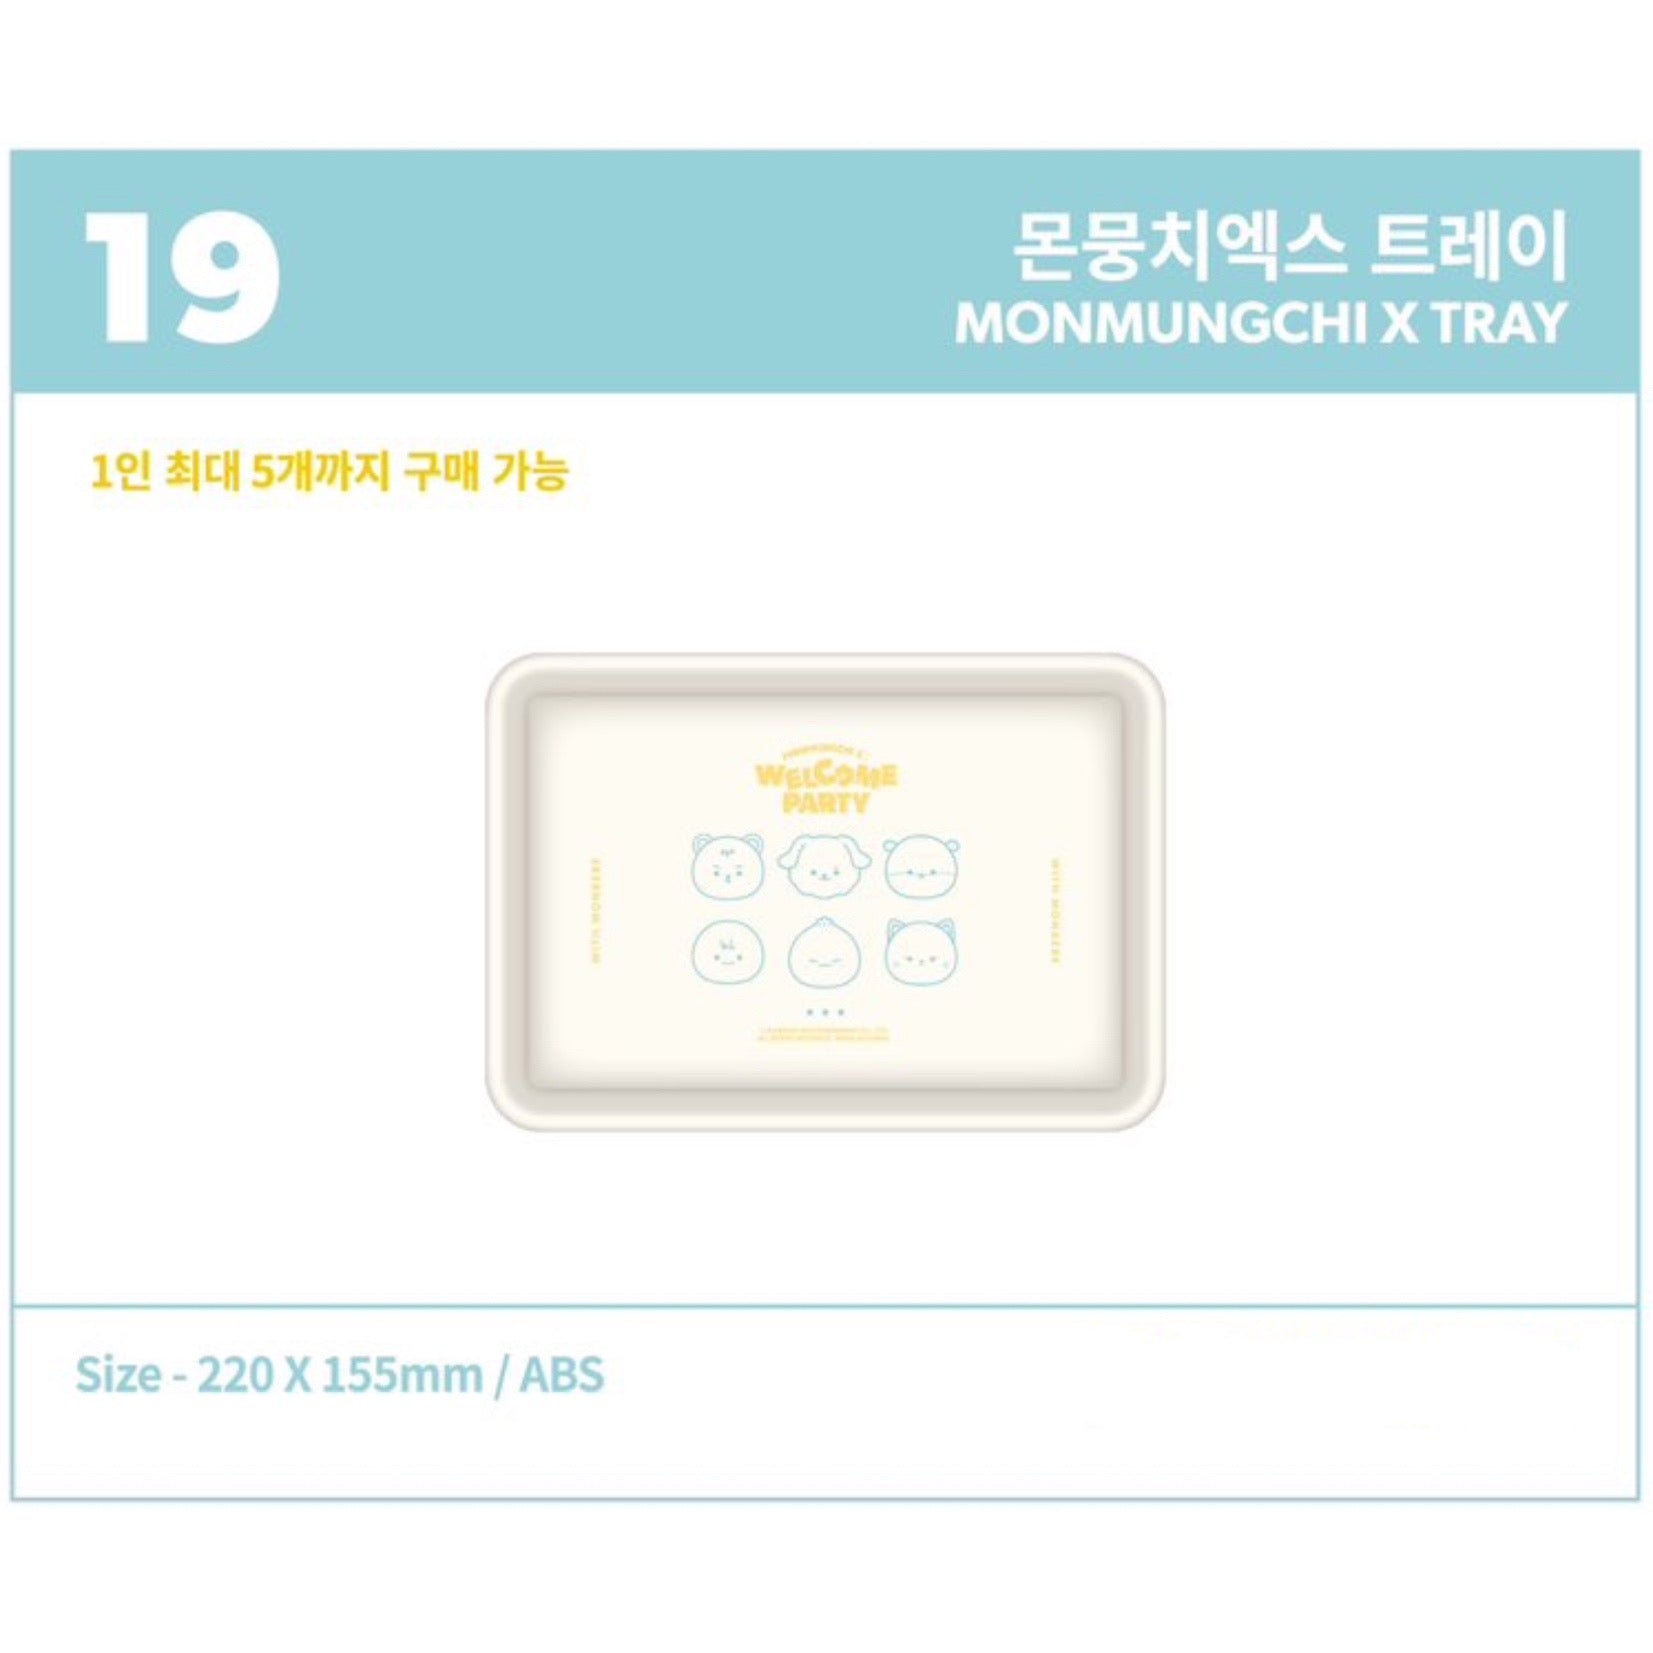 MONSTA X - MONMUNGCHI X : WELCOME PARTY Pop Up Store Official MD 